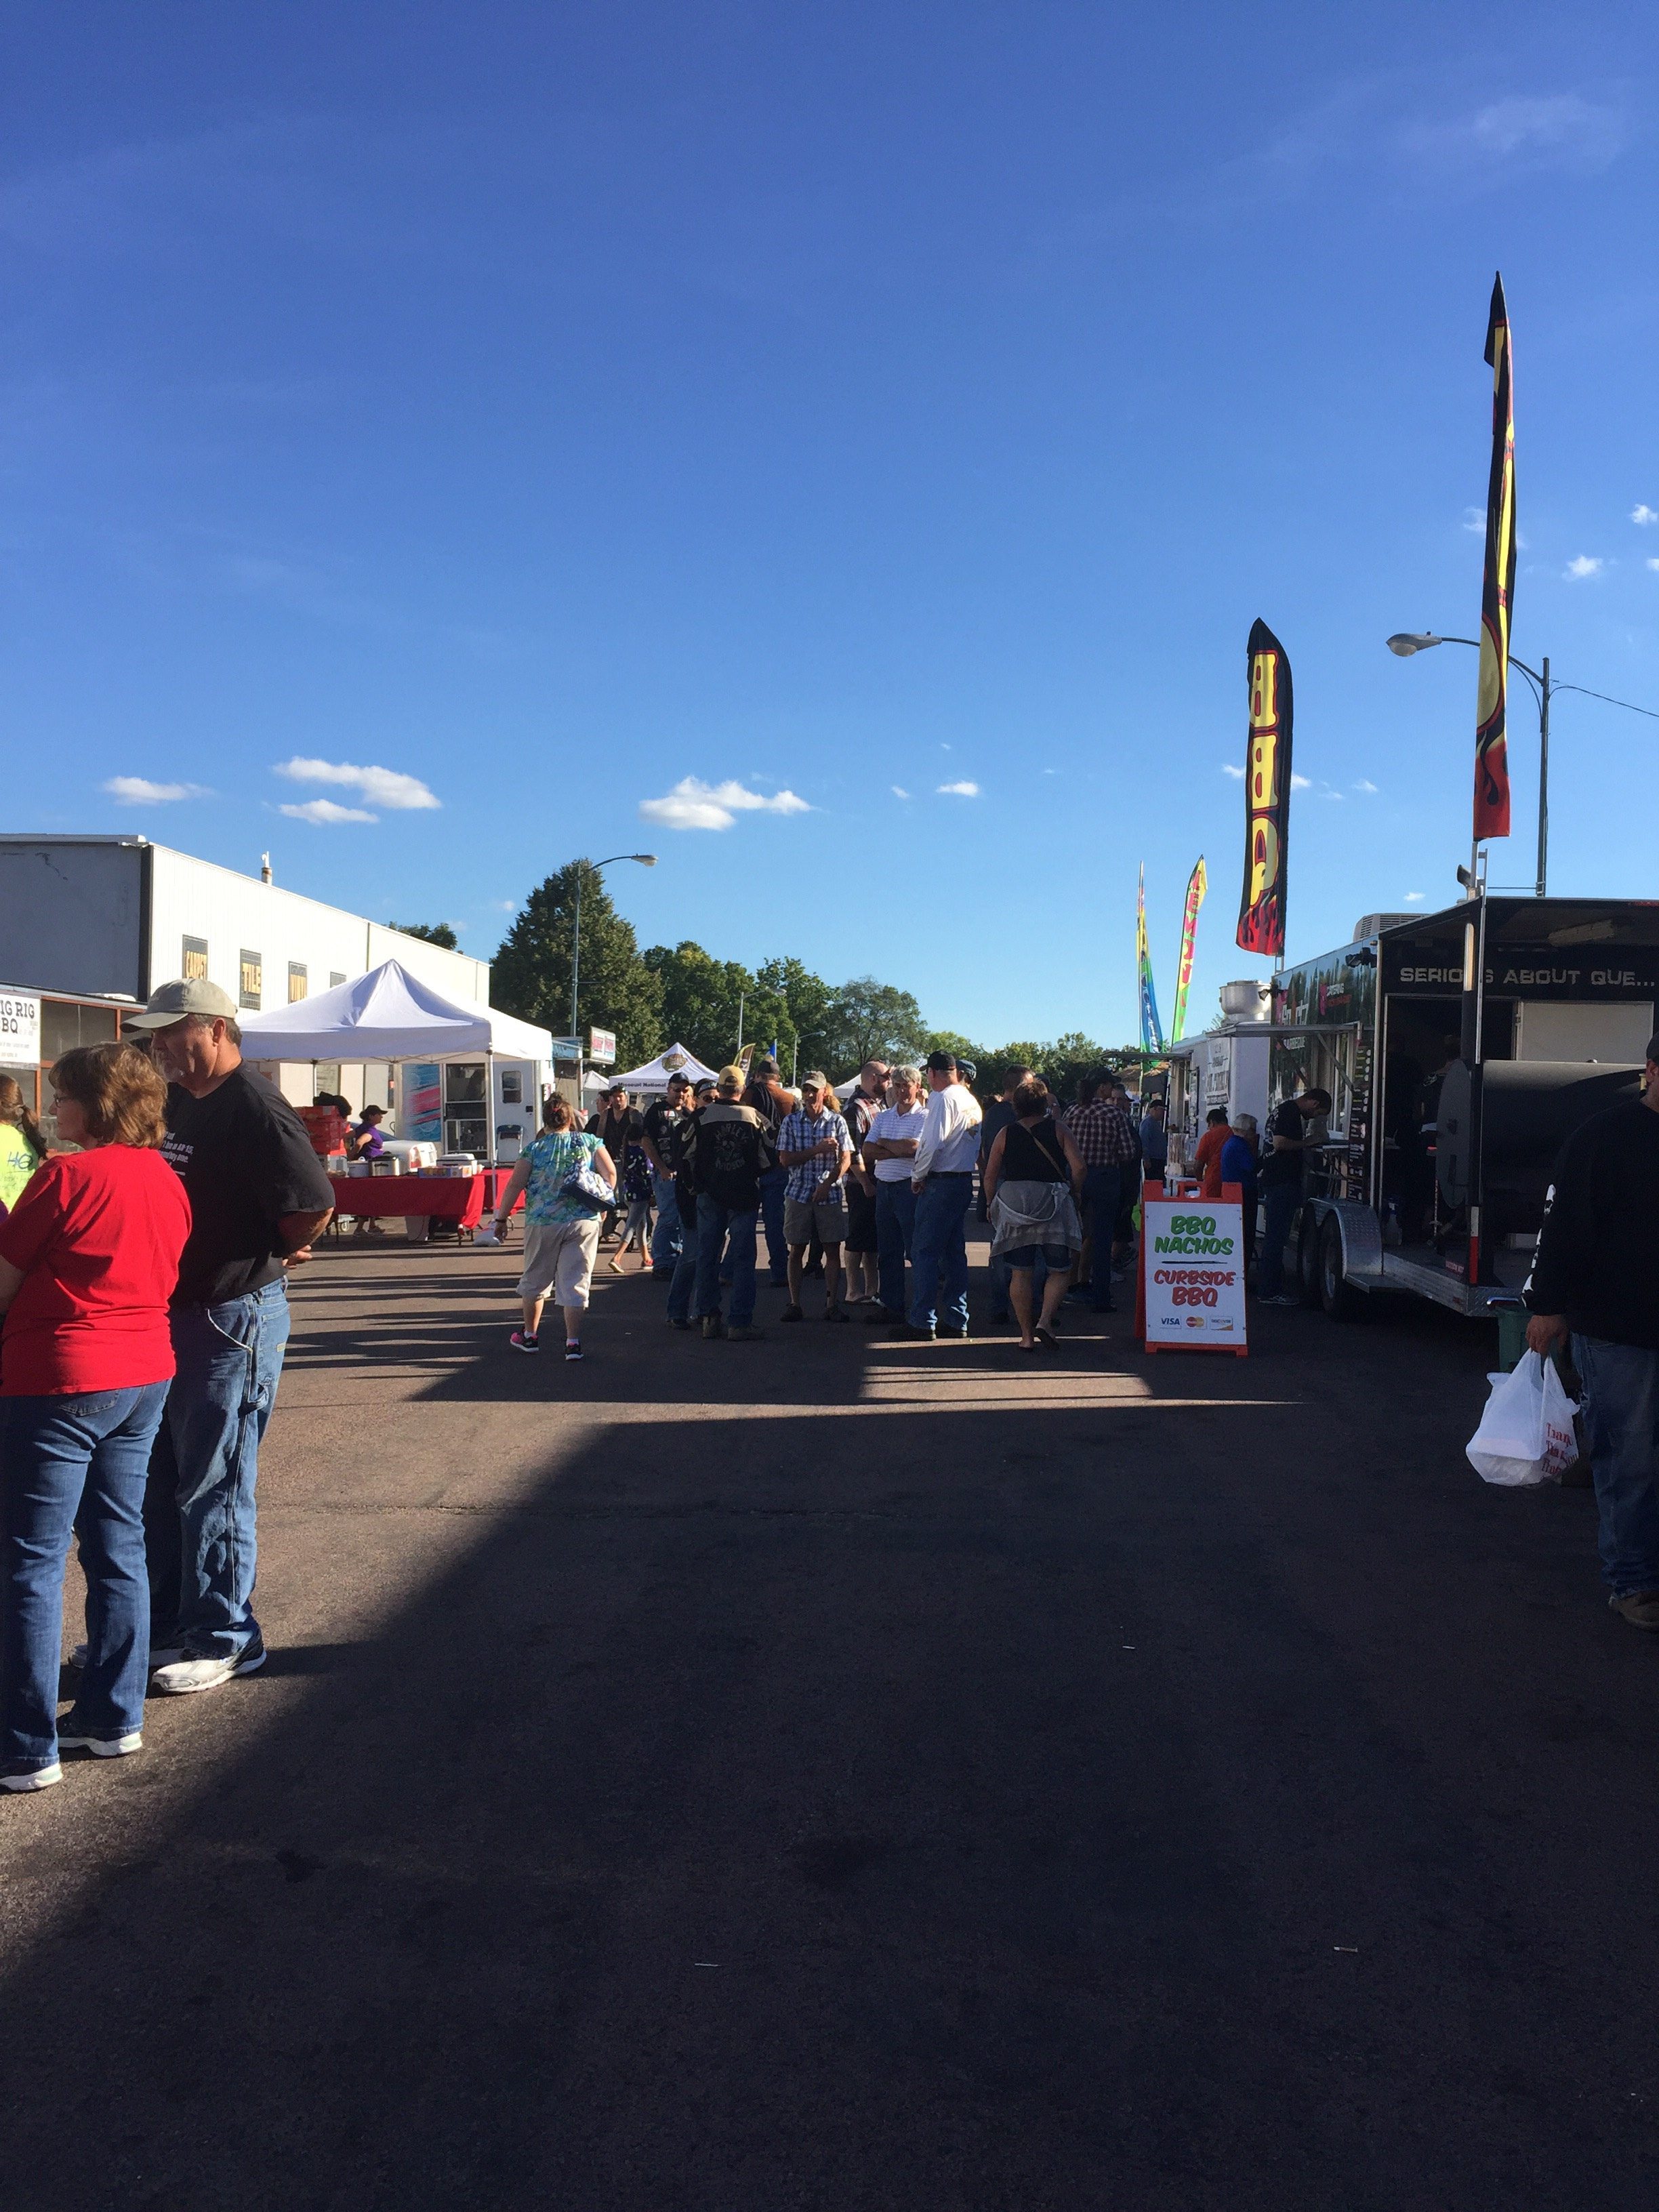 Annual Ribs, Rods & Rock ‘n Roll festival takes over downtown Vermillion